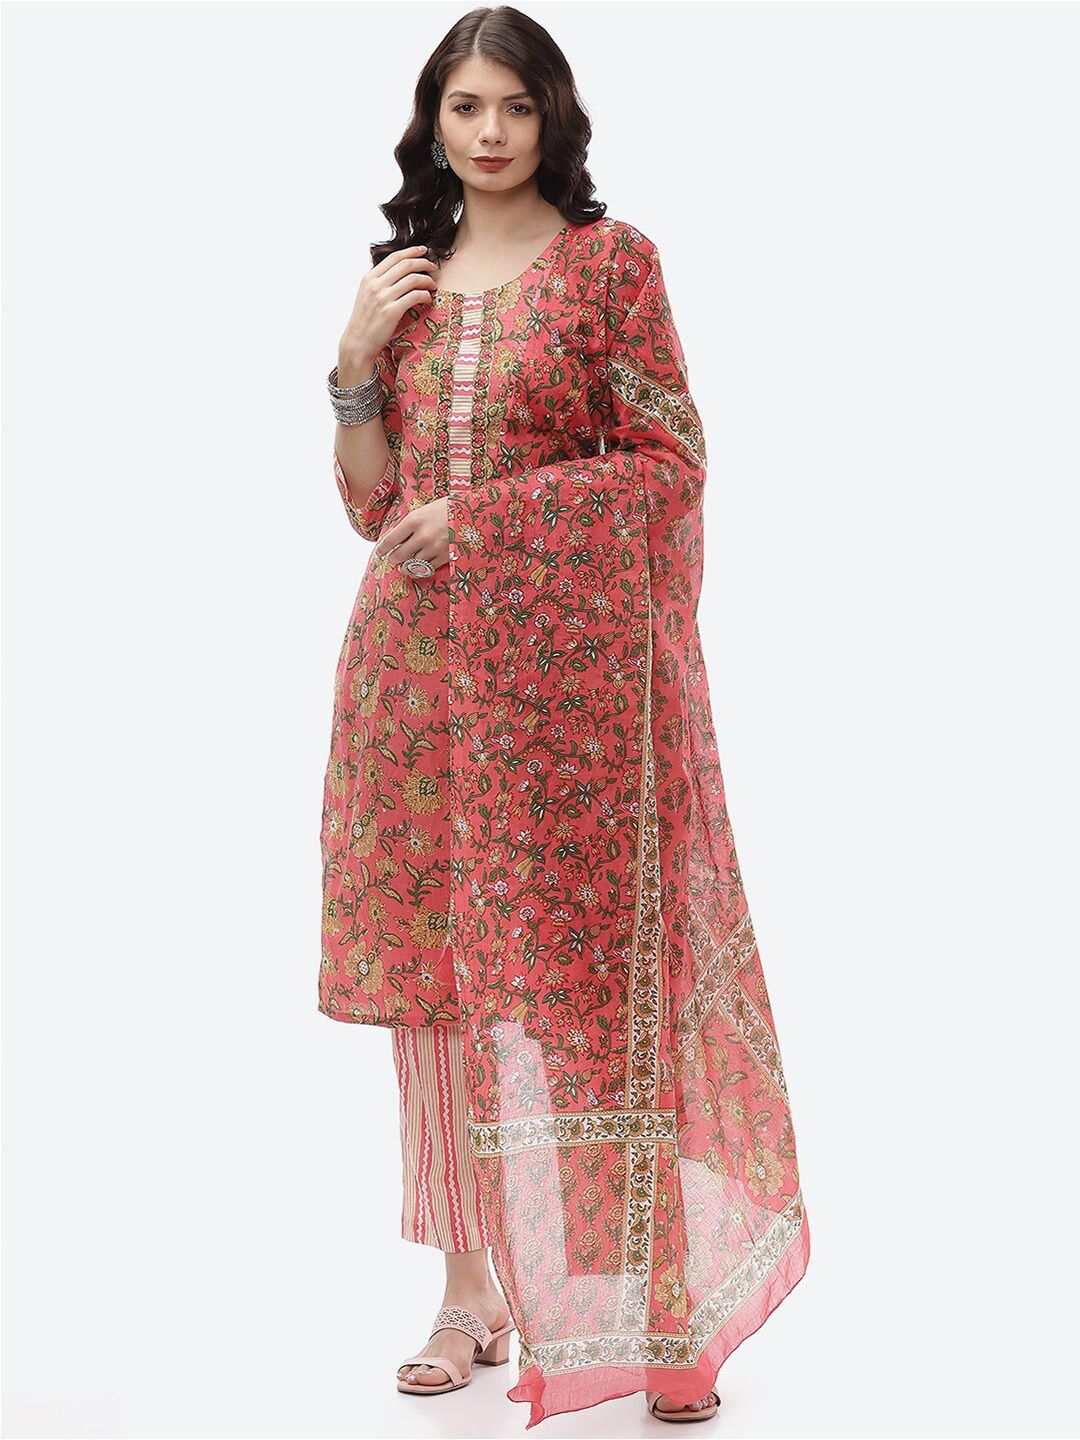 Biba Women Pink & Green Printed Unstitched Dress Material Price in India